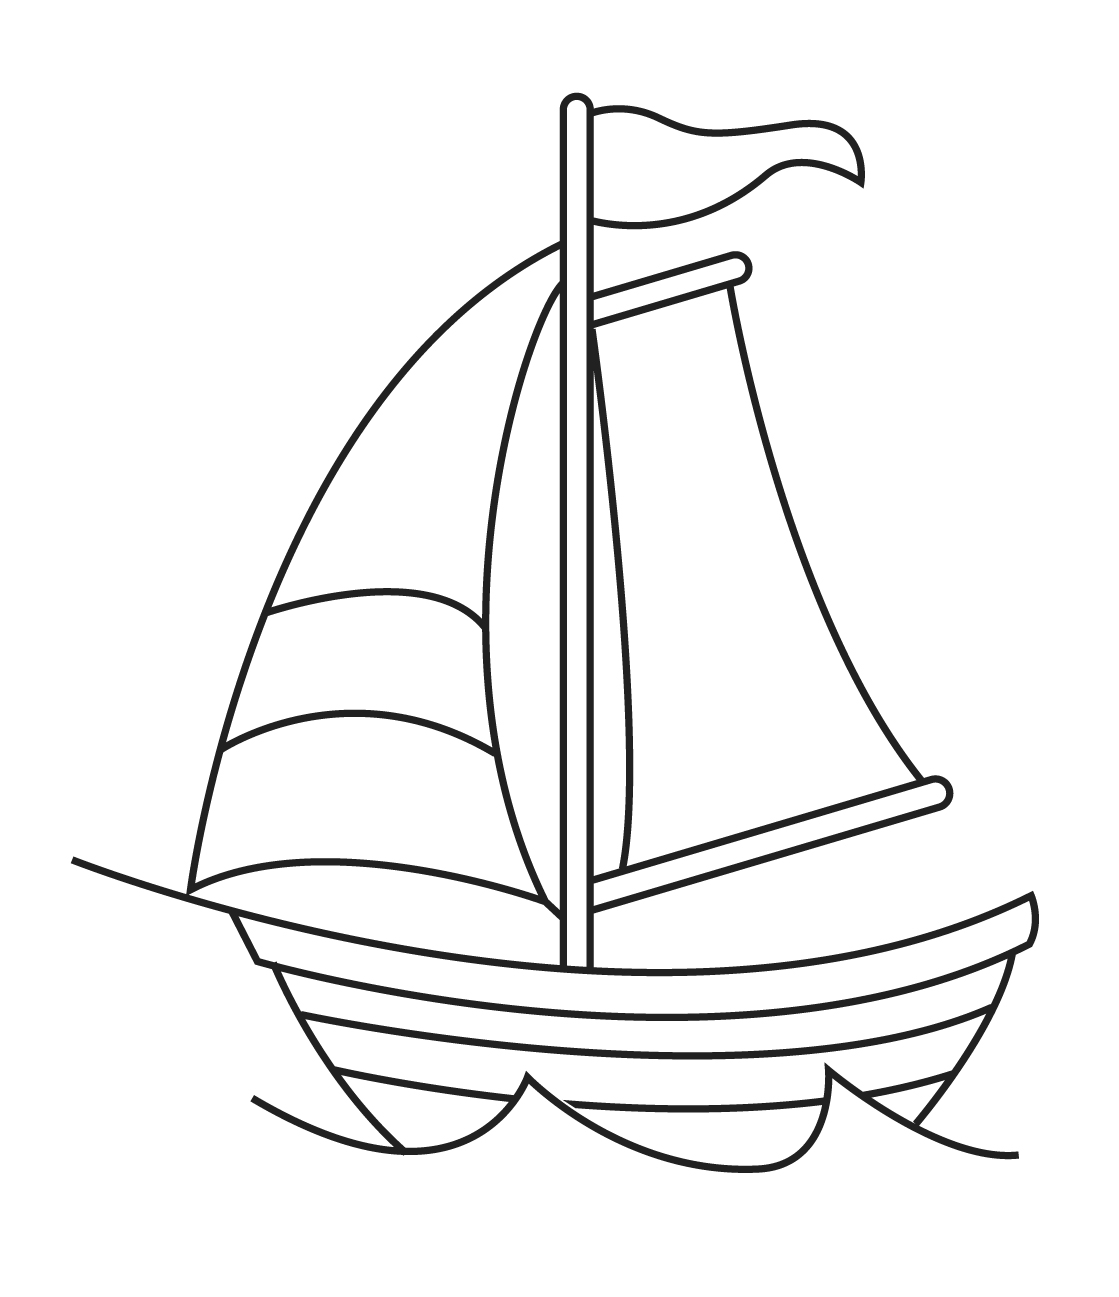 boat outline clipart - photo #43